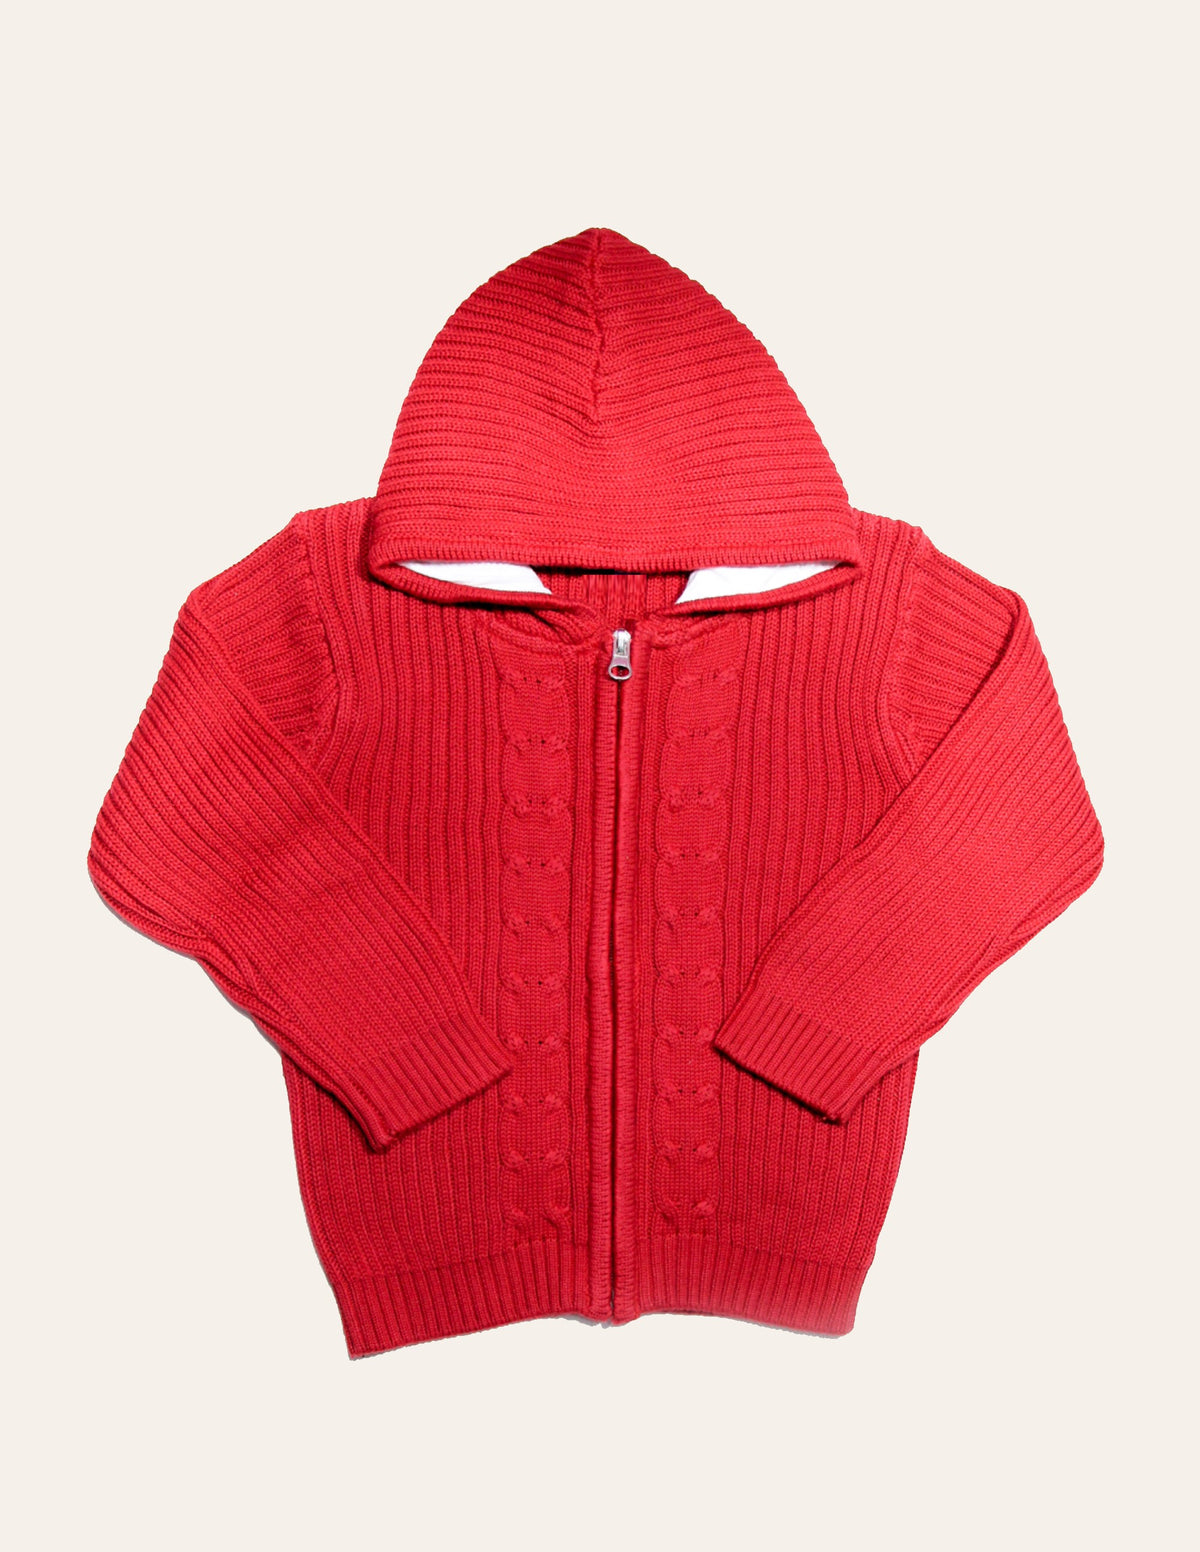 Red Cable-knit Zipper Hoody